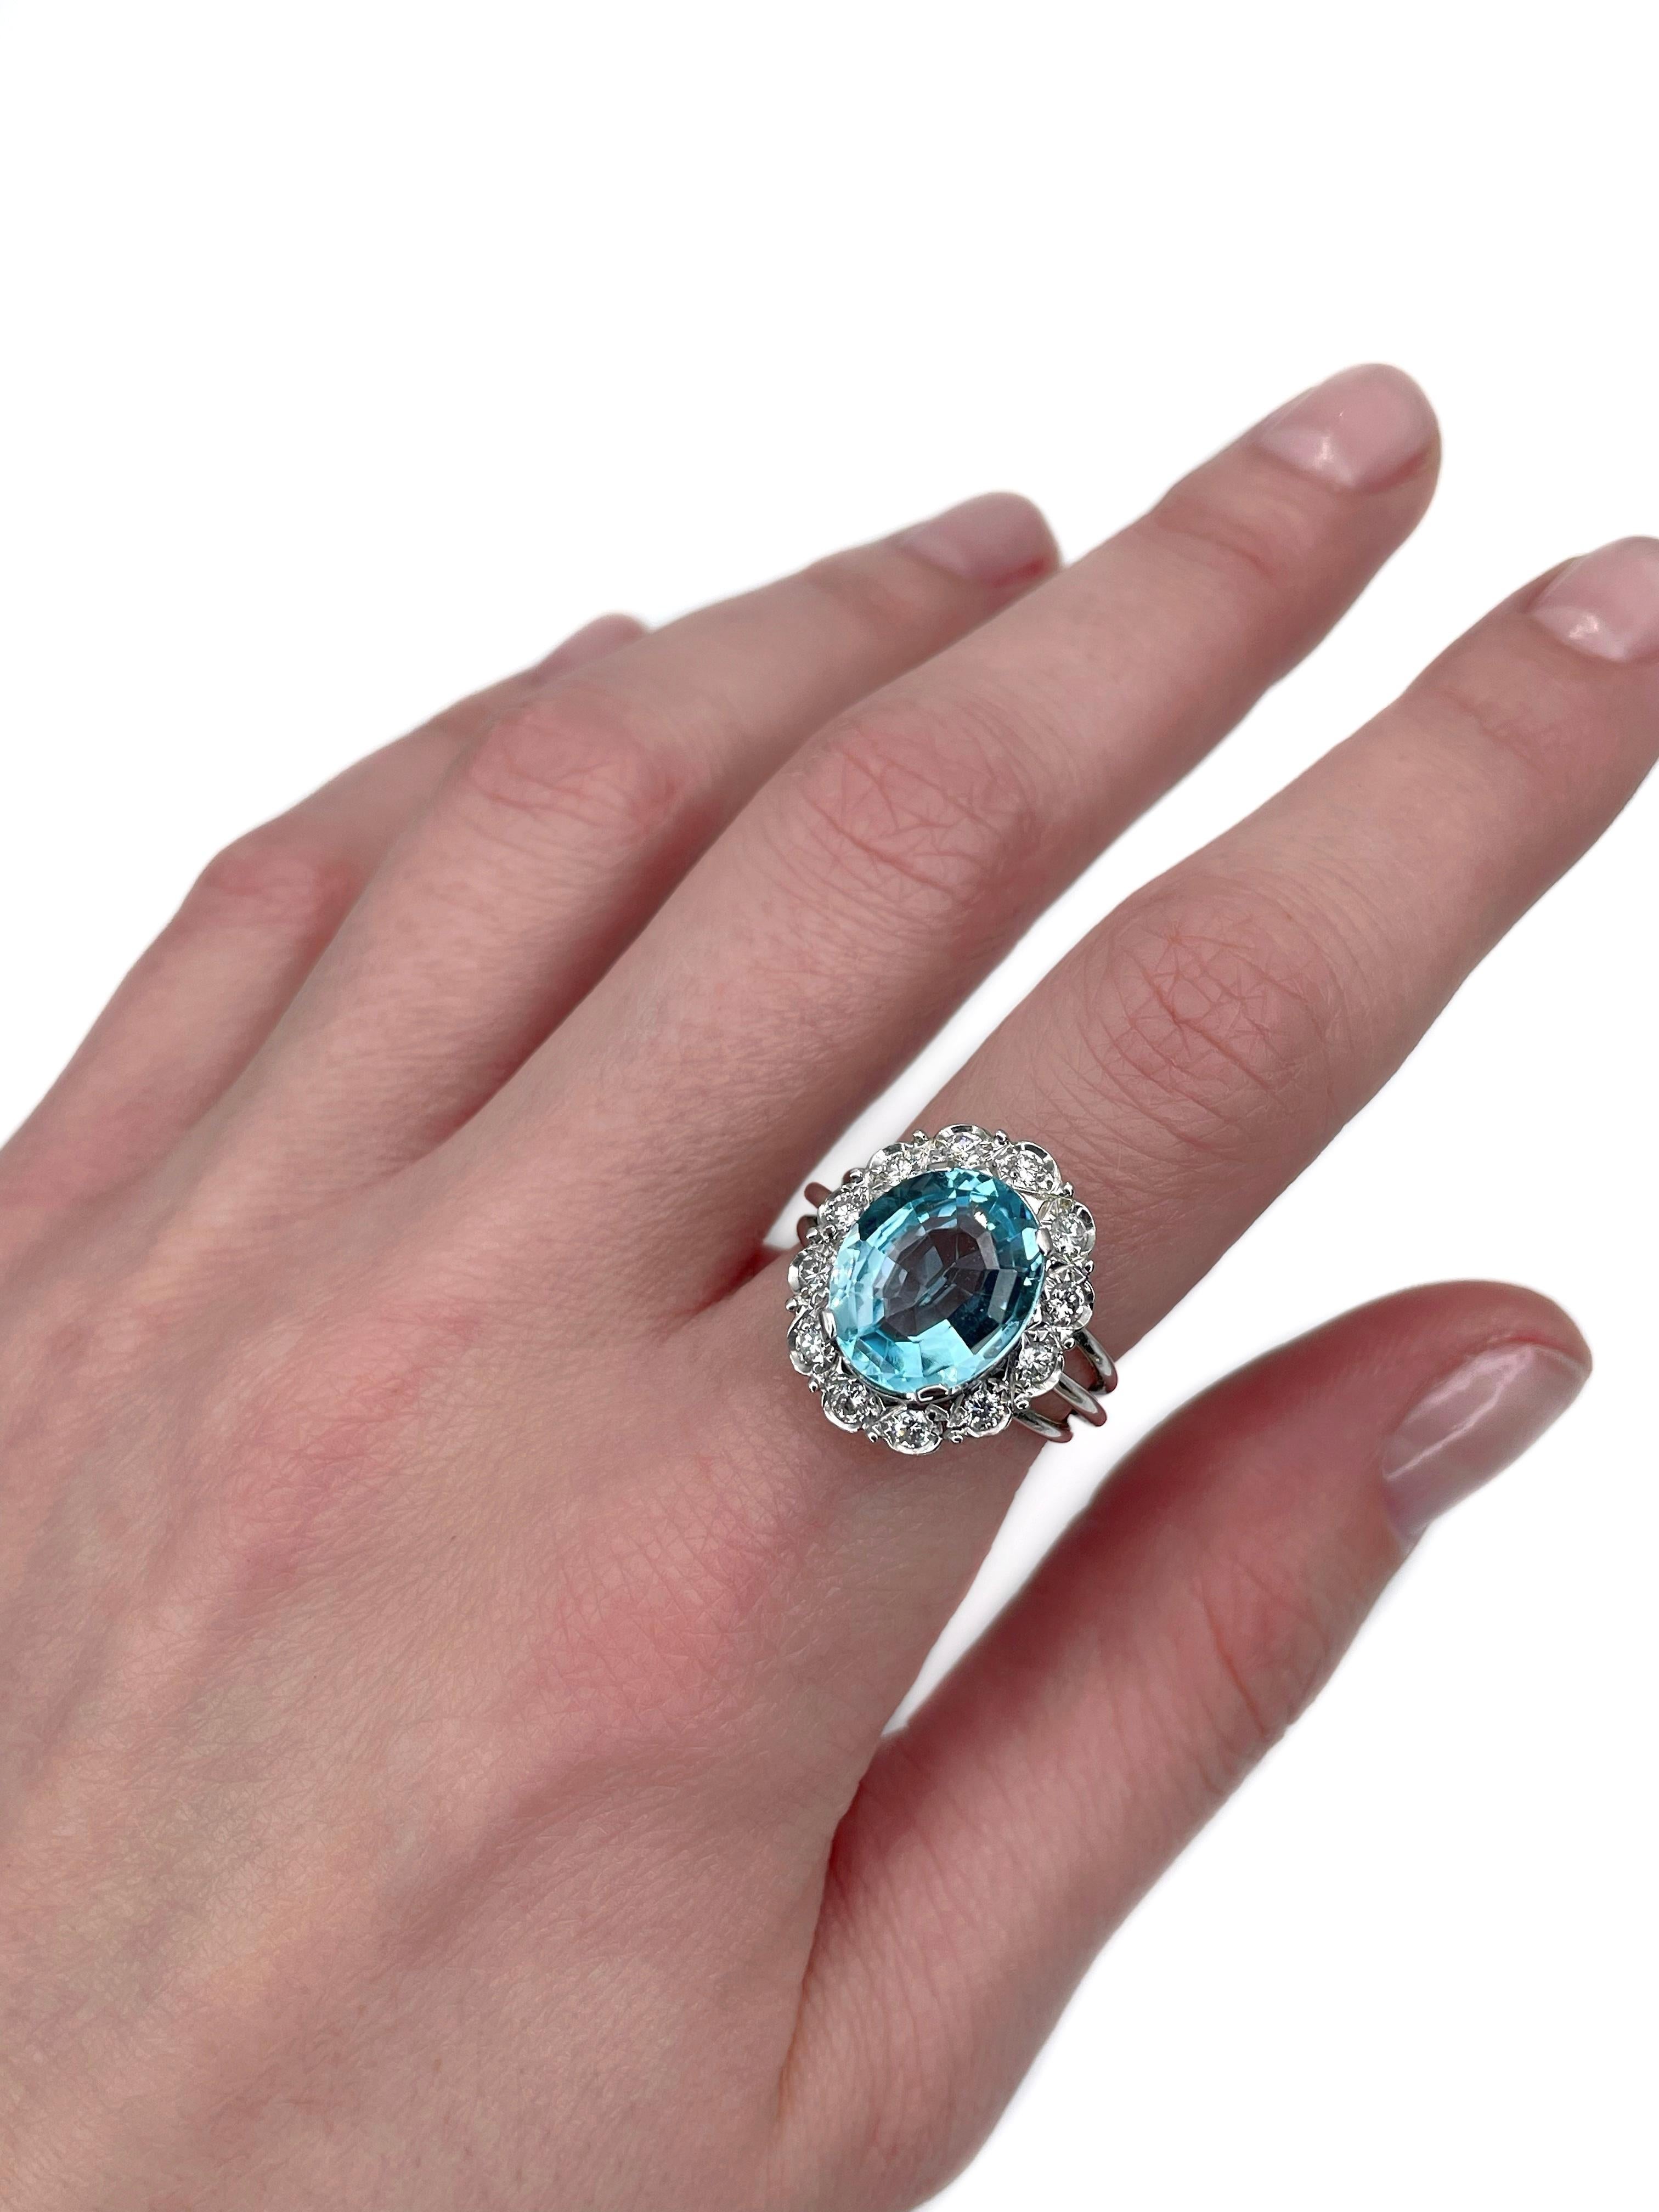 This is a vintage cluster ring crafted in 18K white gold. Circa 1980. 

The piece features:
- 1 topaz (oval cut, 5.50ct, gB 4/2, VVS)
- 12 diamonds (round brilliant cut, TW 0.50ct, RW-W, VS-SI)

Weight: 6.50g
Size: 17 (US 6.75)

IMPORTANT: please